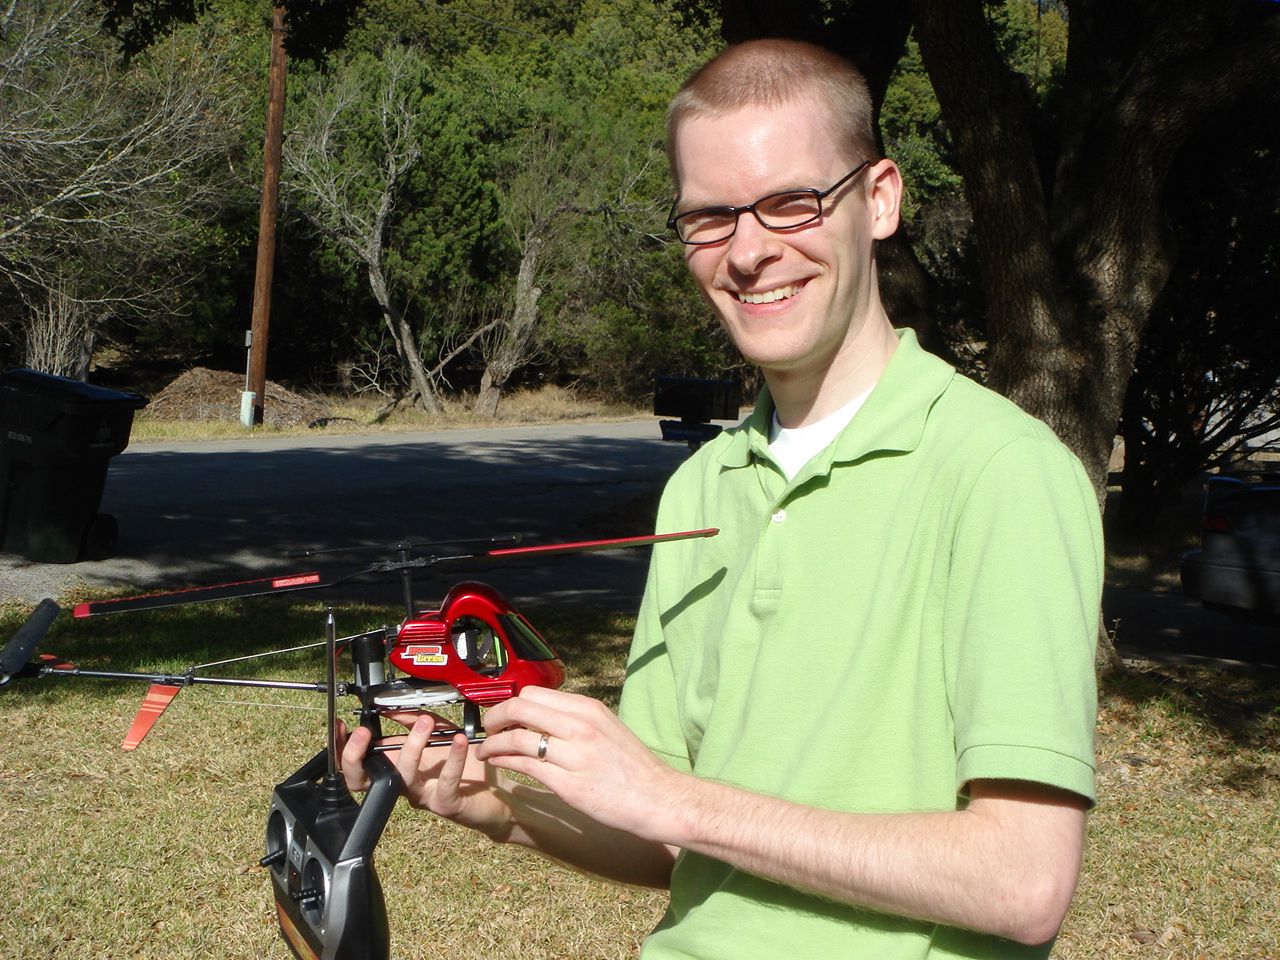 William with his helicopter